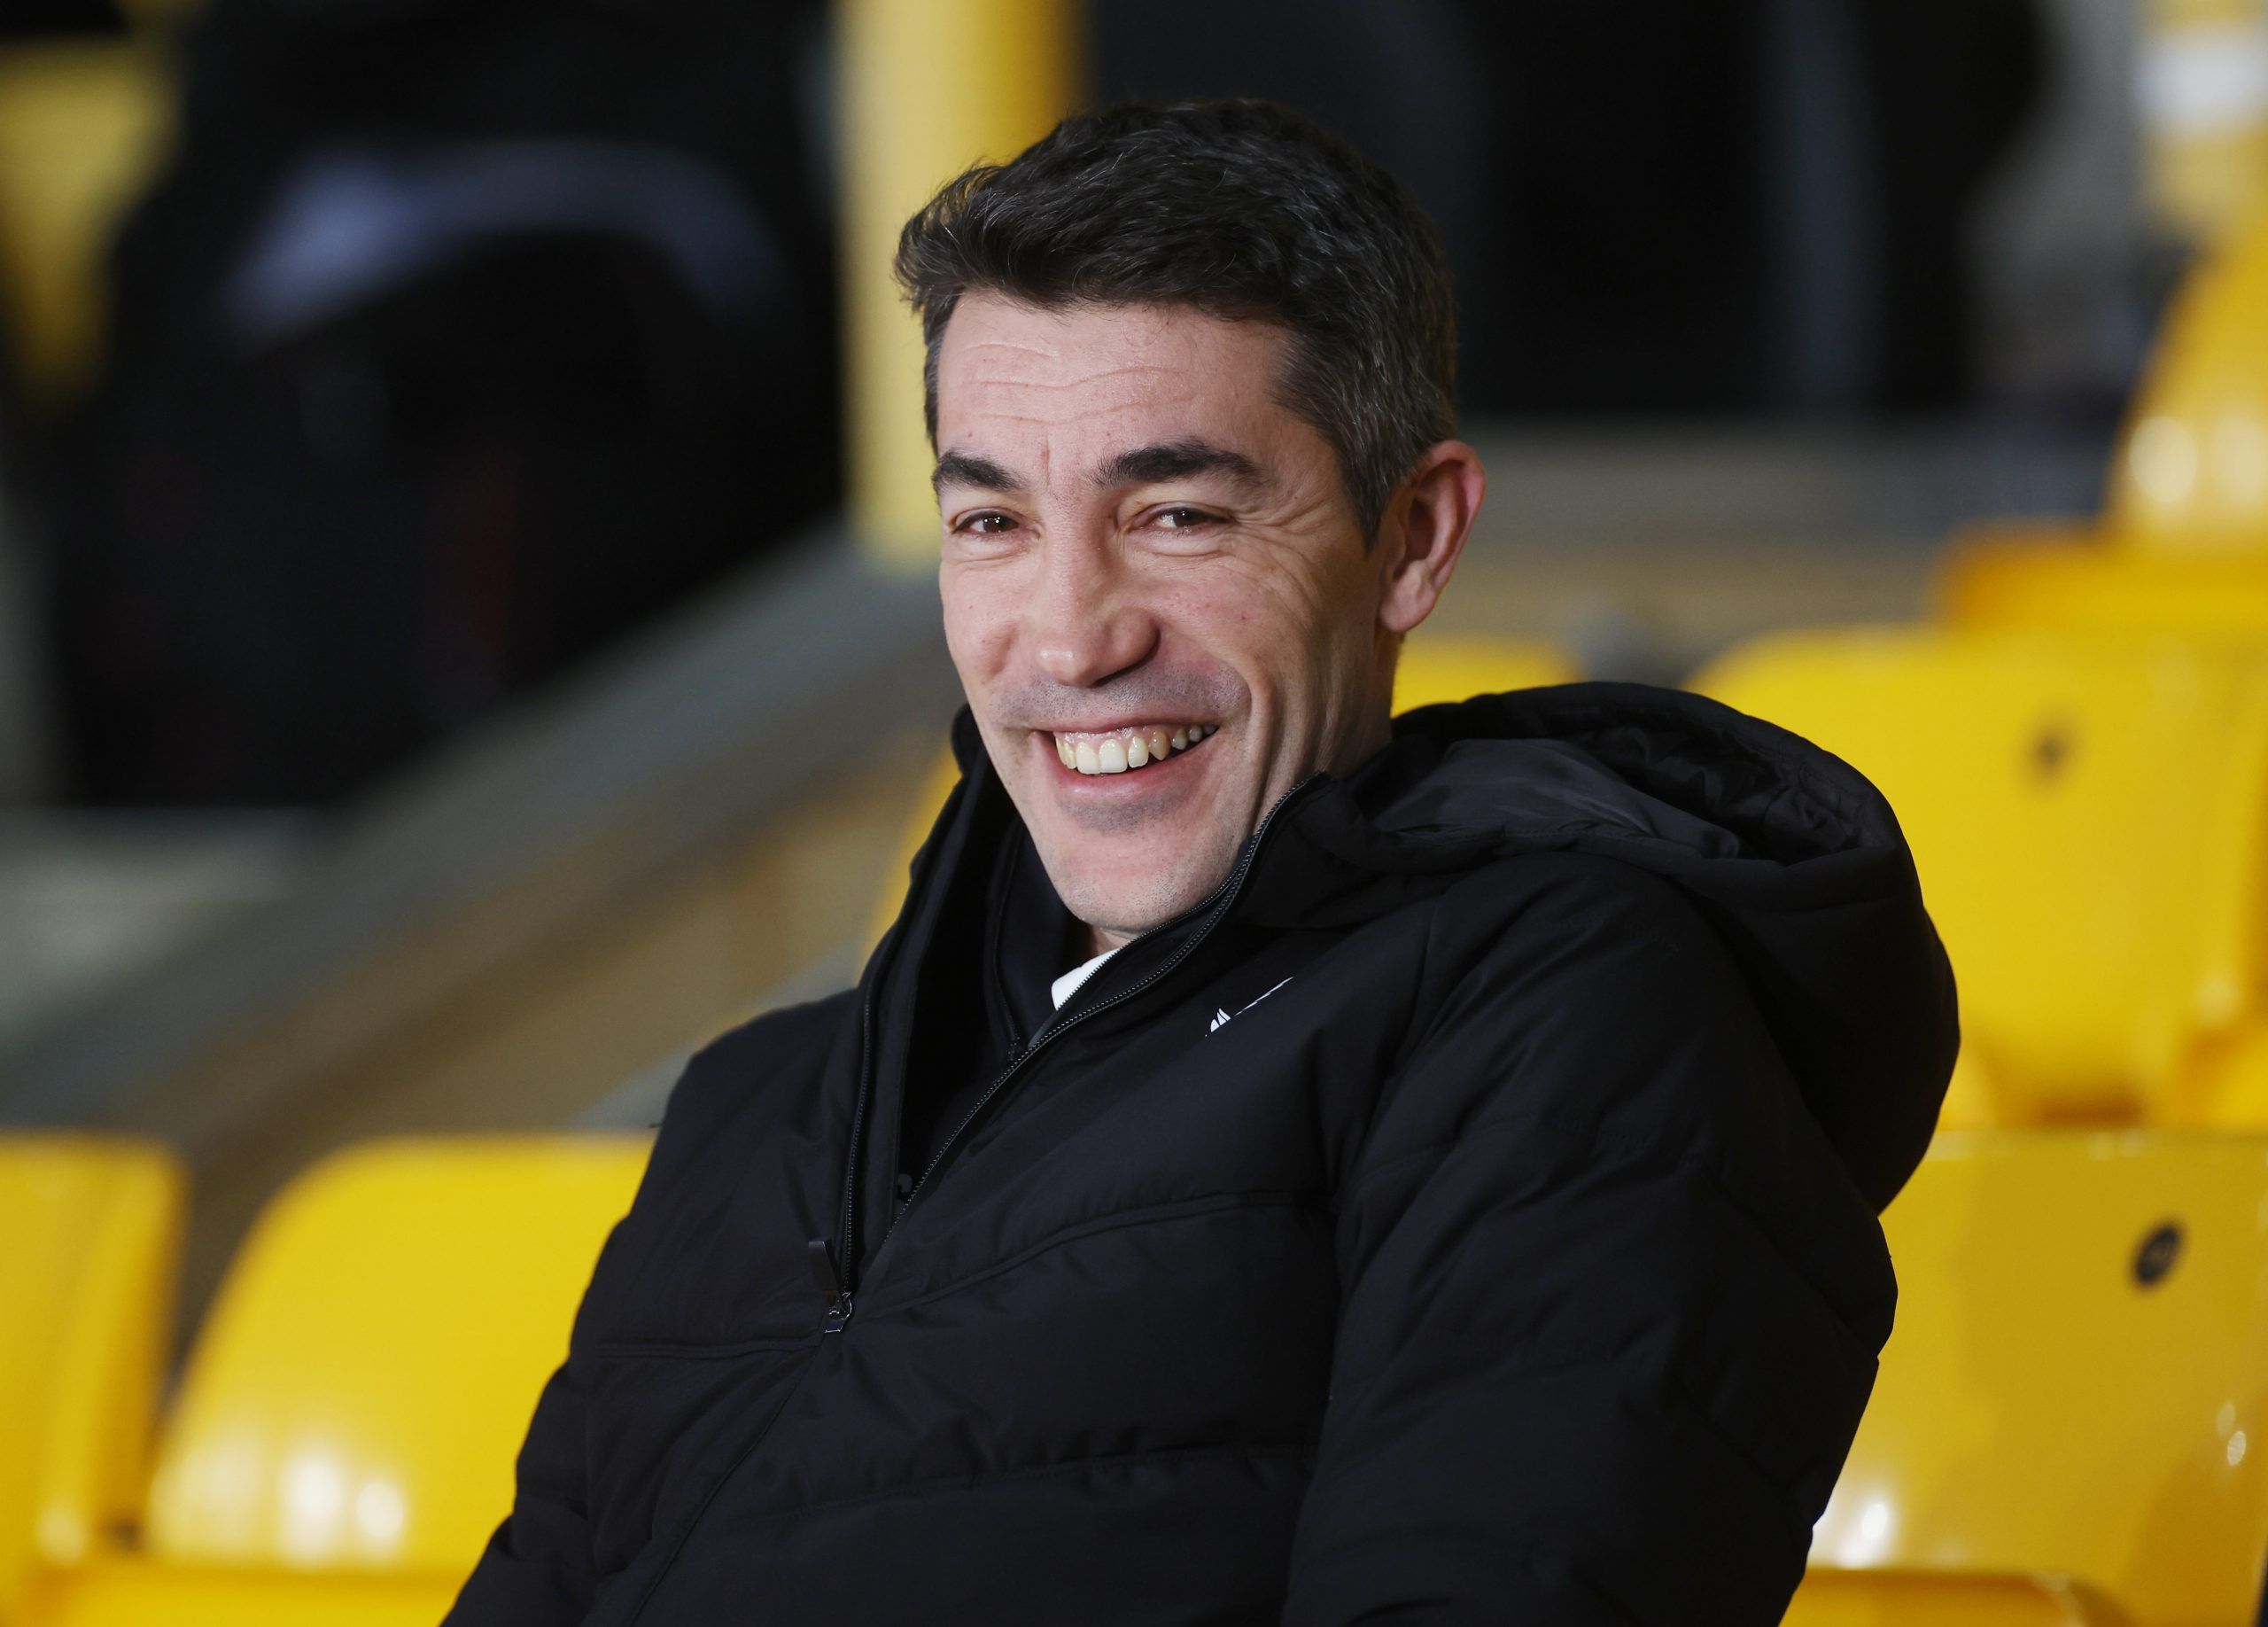 Soccer Football - Premier League - Wolverhampton Wanderers v Leeds United - Molineux Stadium, Wolverhampton, Britain - March 18, 2022 Wolverhampton Wanderers manager Bruno Lage in the stands before the match Action Images via Reuters/Paul Childs EDITORIAL USE ONLY. No use with unauthorized audio, video, data, fixture lists, club/league logos or 'live' services. Online in-match use limited to 75 images, no video emulation. No use in betting, games or single club /league/player publications.  Plea